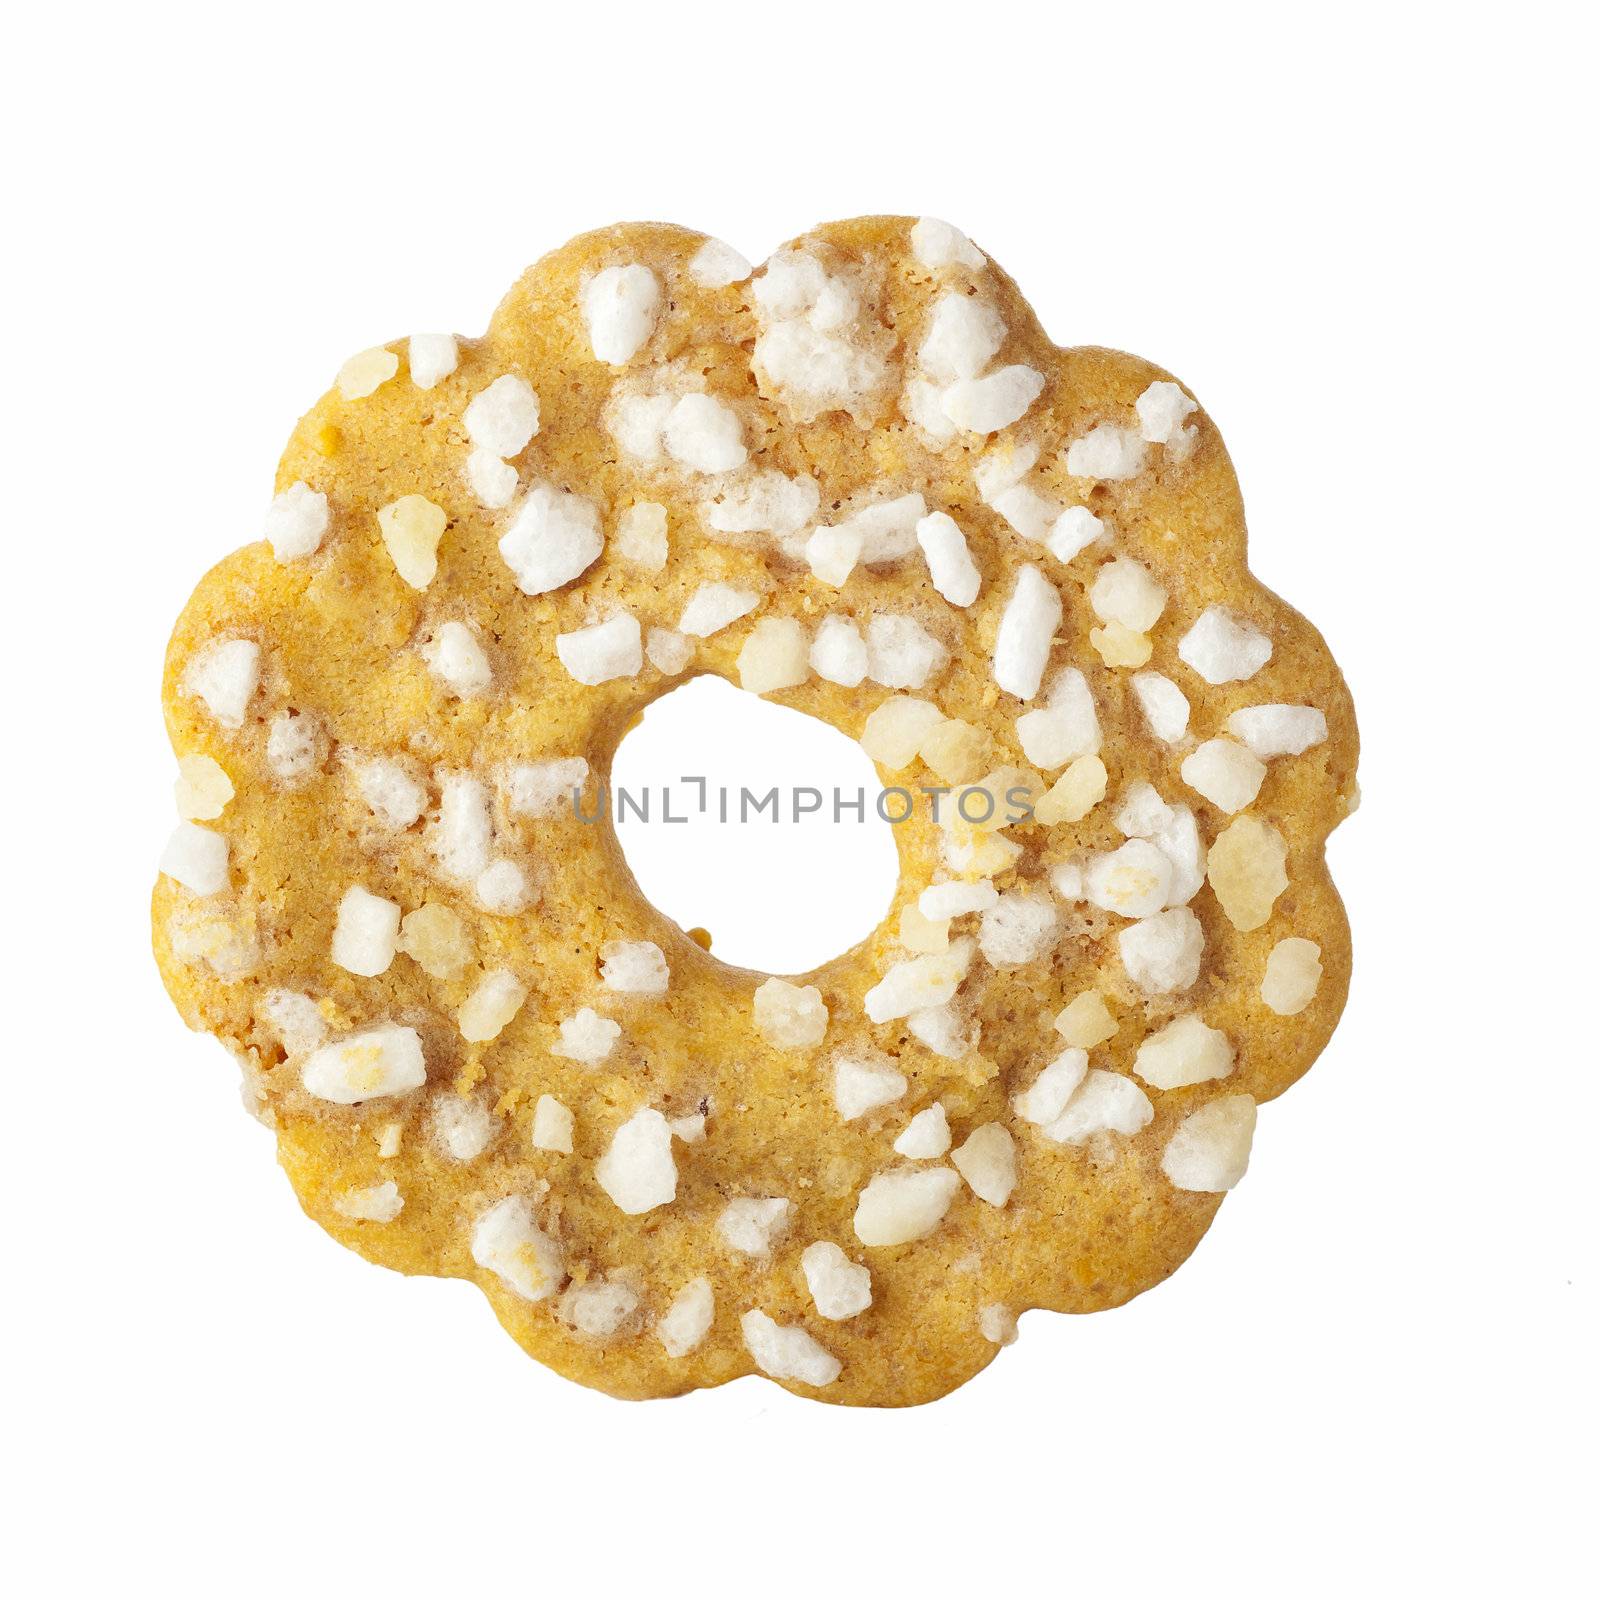 Round cookie with hole and bits of sugar, isolated on white background